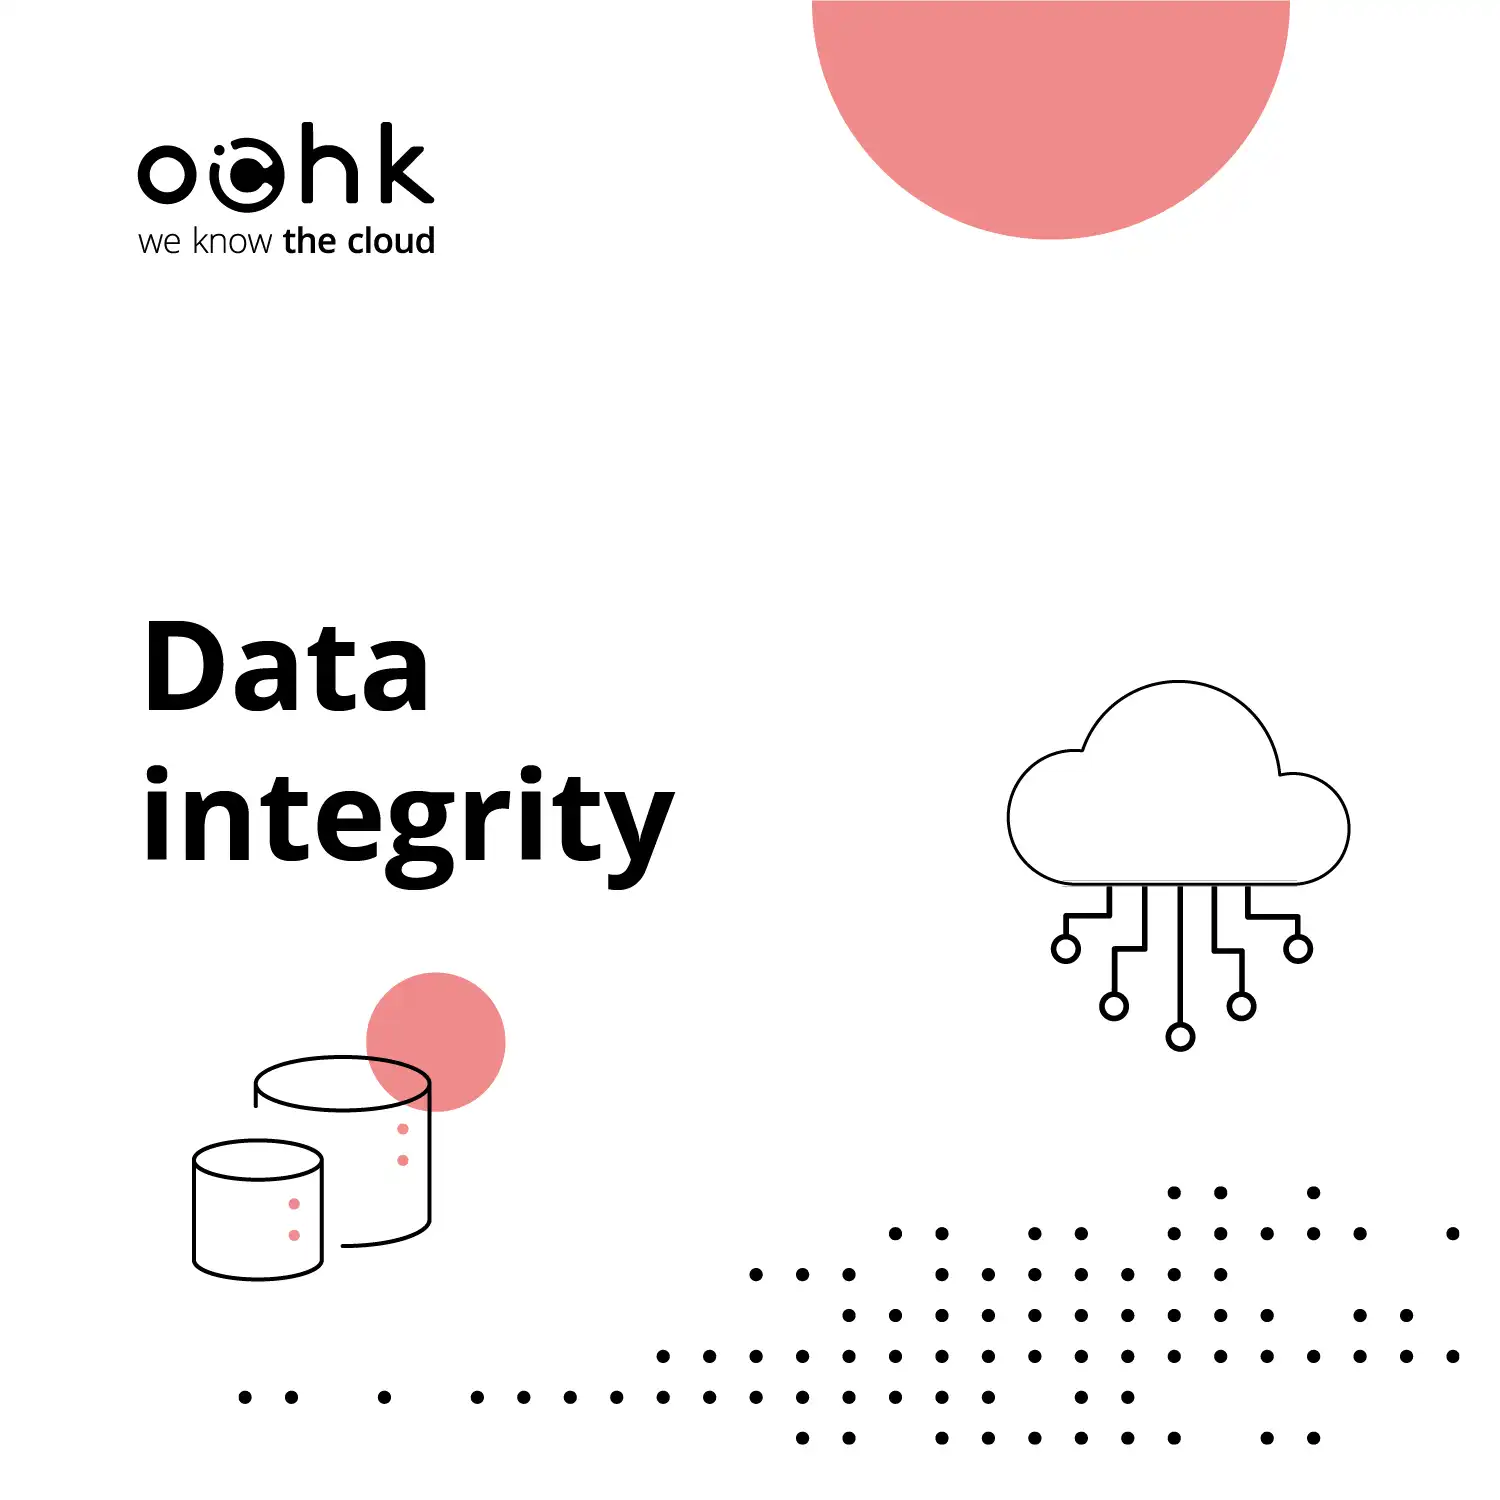 Data integrity as the cornerstone of IT projects